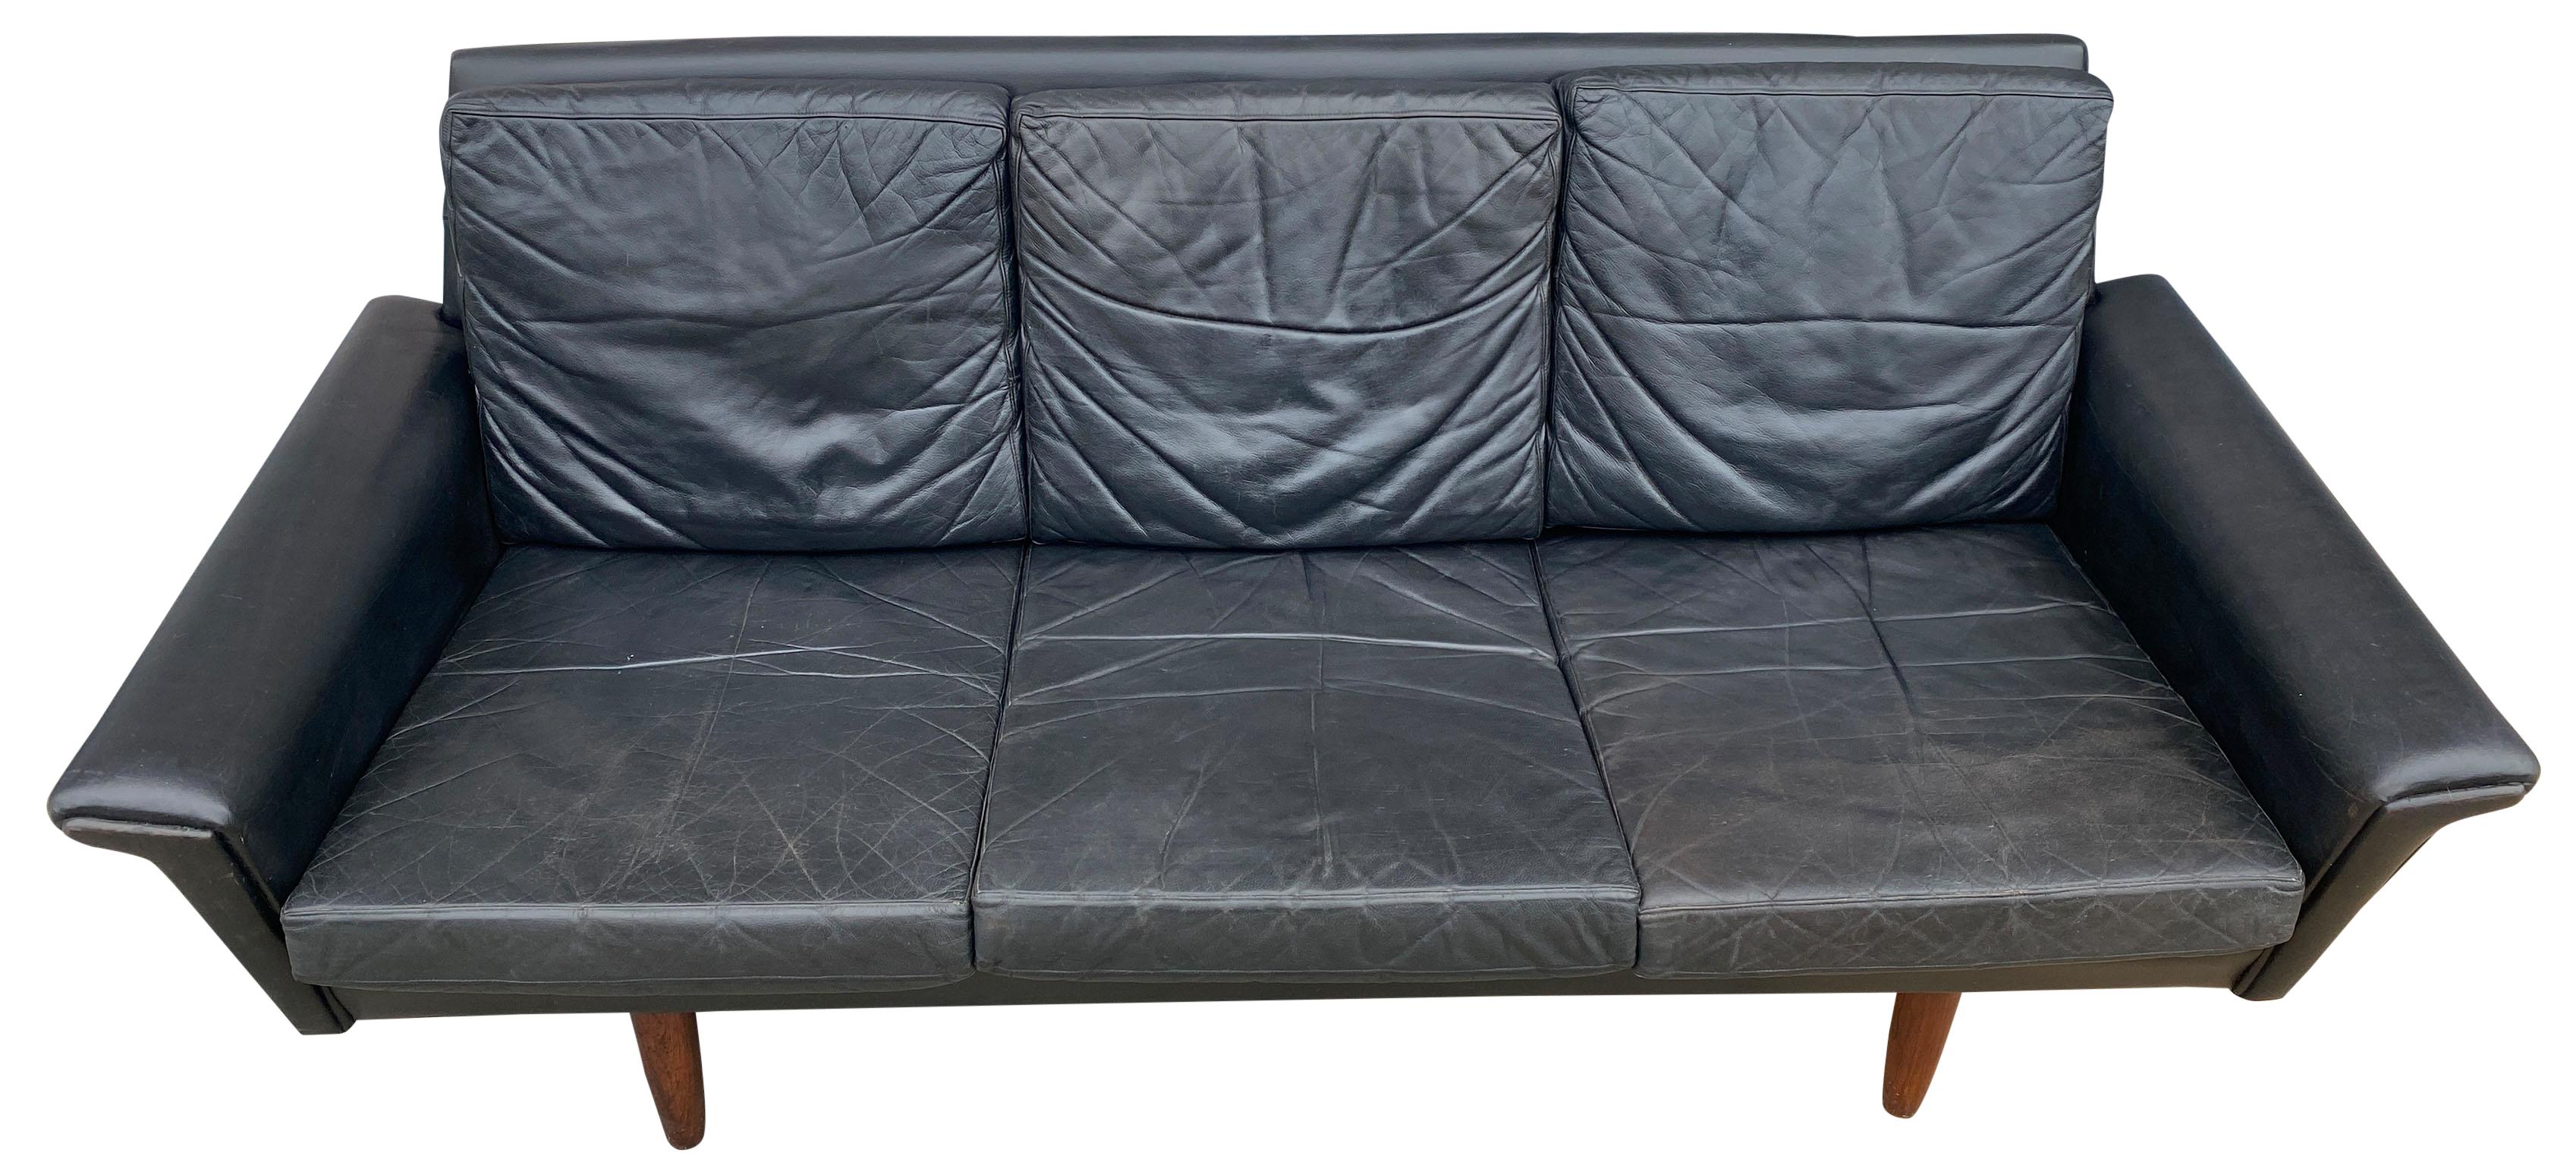 Beautiful black Leather low 3-seat Danish modern couch sofa with rosewood legs. Amazing black soft leather. Original beautiful soft black leather worn in perfectly. Original vintage condition. All cushions are removable legs unscrew. no label - Made